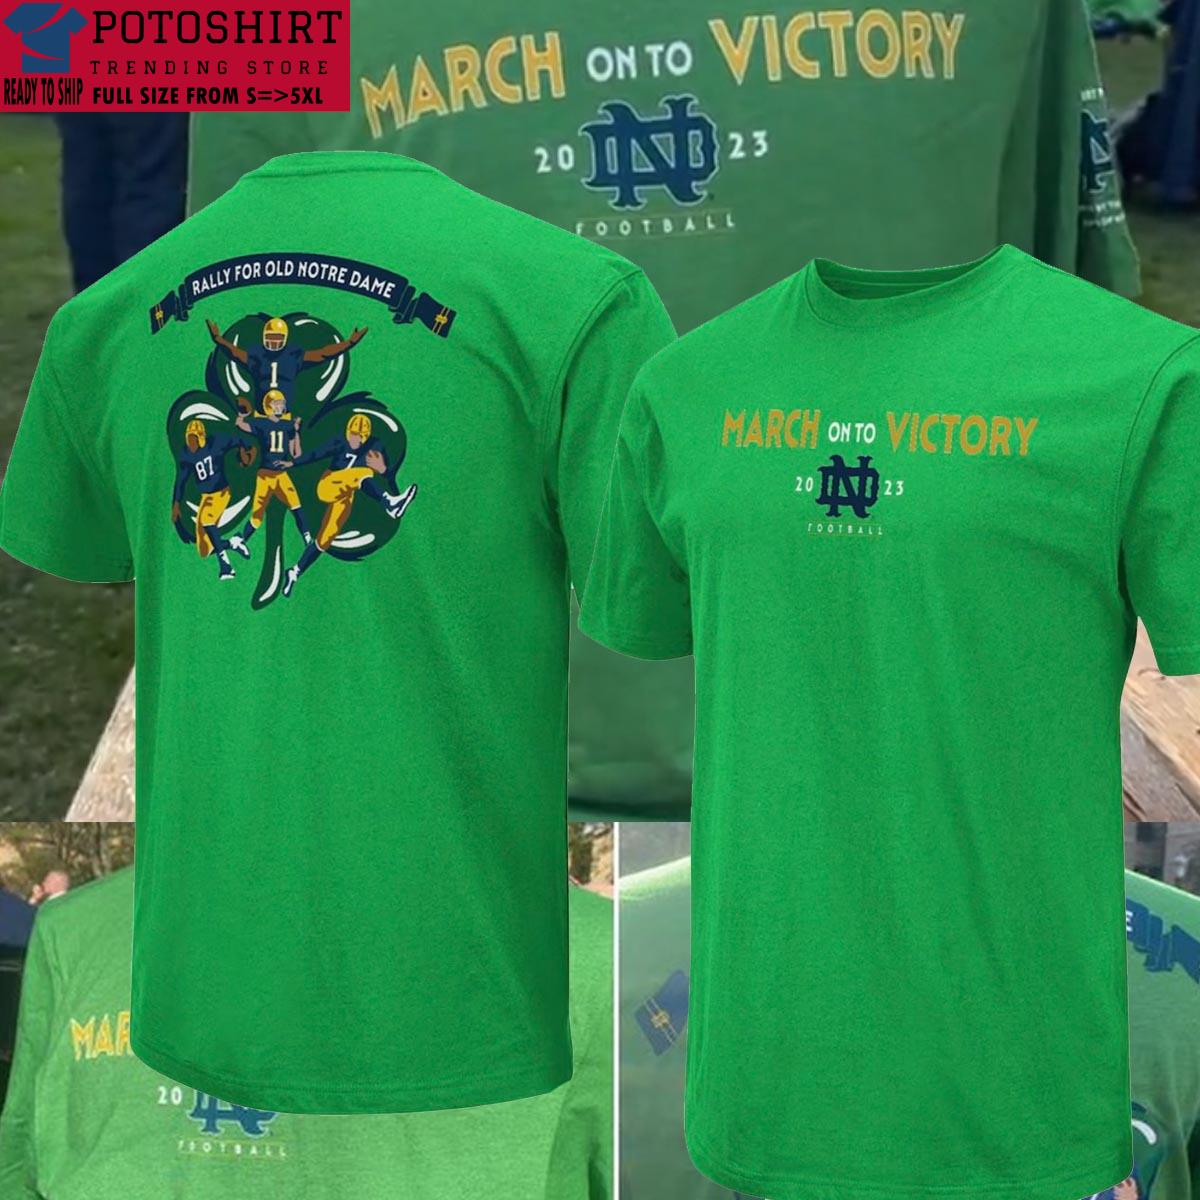 Official Und Shop March On To Victory 2023 Rally For Old Notre Dame Shirt qqqqqqqqq